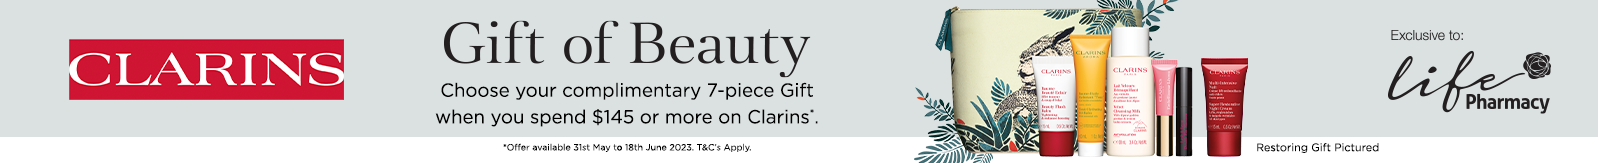 W23_CLARINS_MAJOR_GXH_HOMEPAGE_STRIP_BANNER_MOBILE_1599X163.png